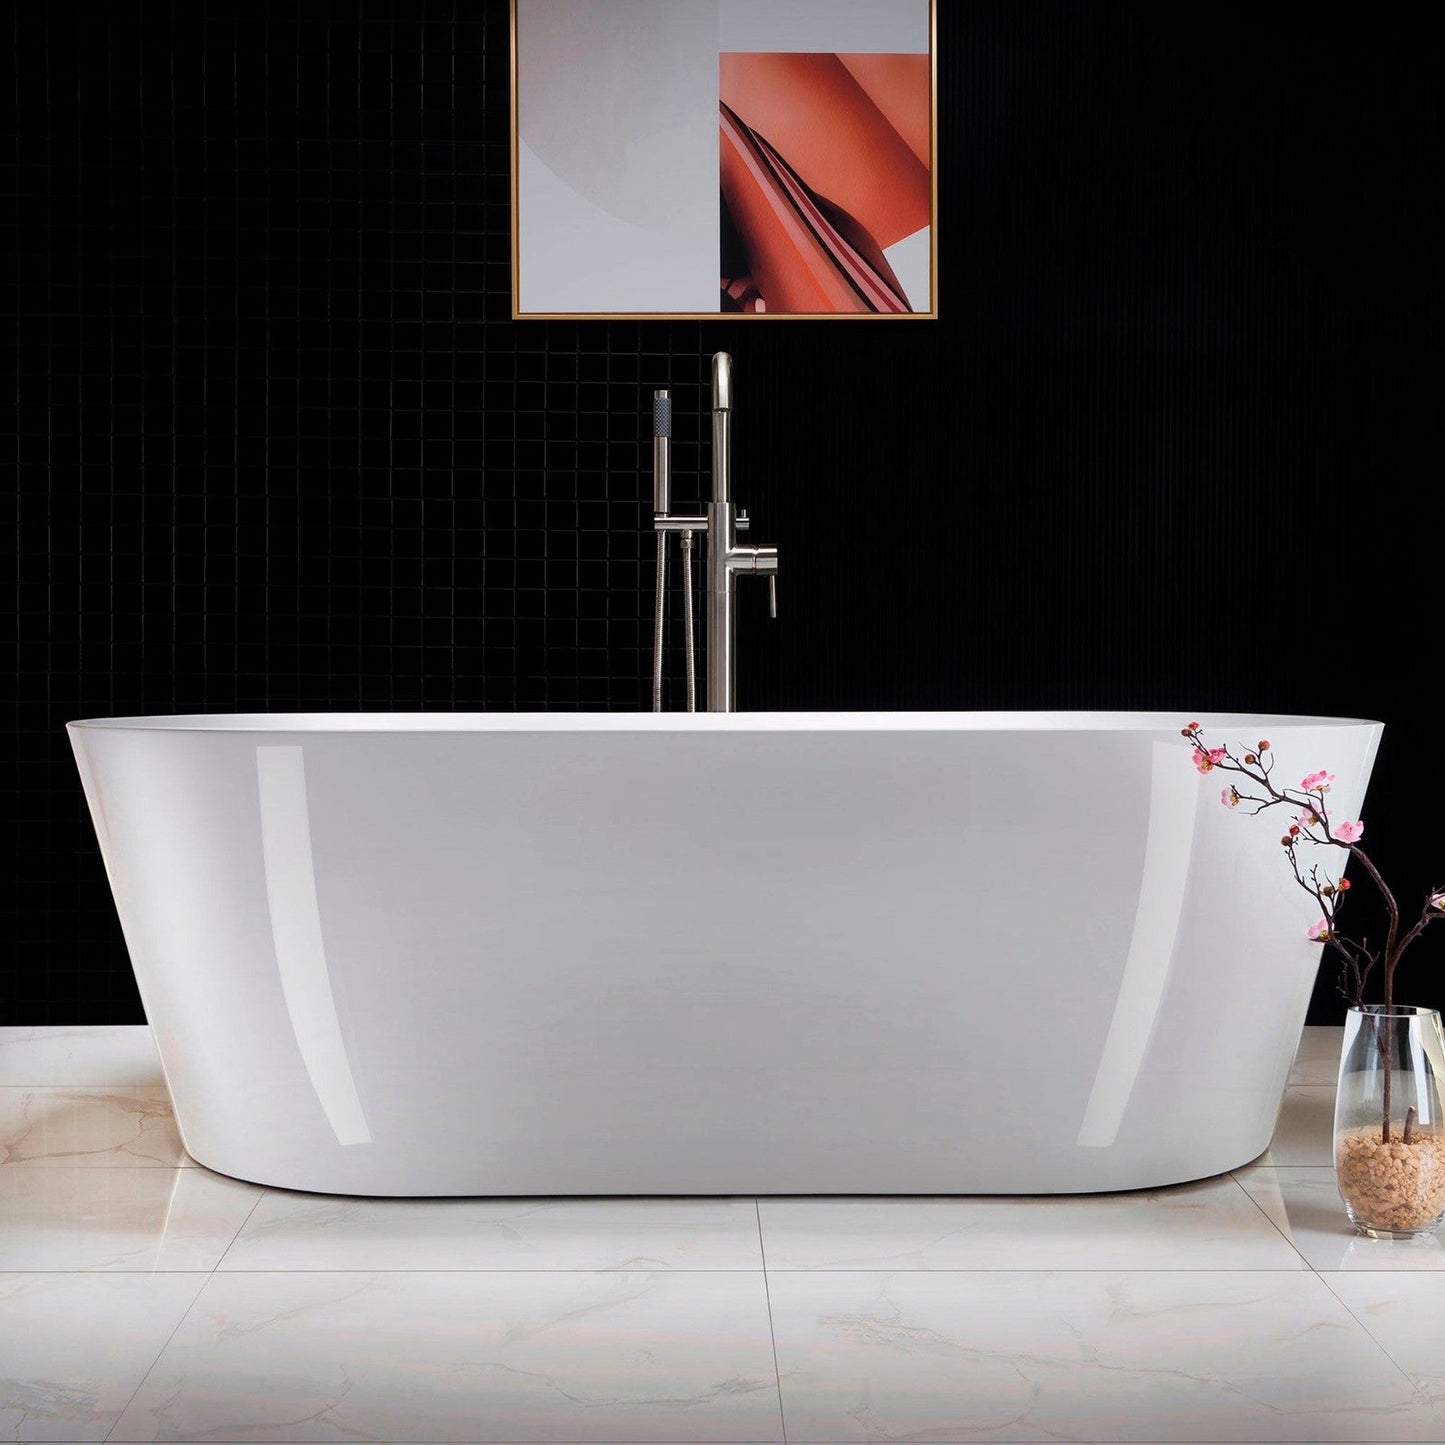 WoodBridge 71" White Acrylic Freestanding Contemporary Soaking Bathtub With Brushed Nickel Drain, Overflow, F0023BNRD Tub Filler and Caddy Tray